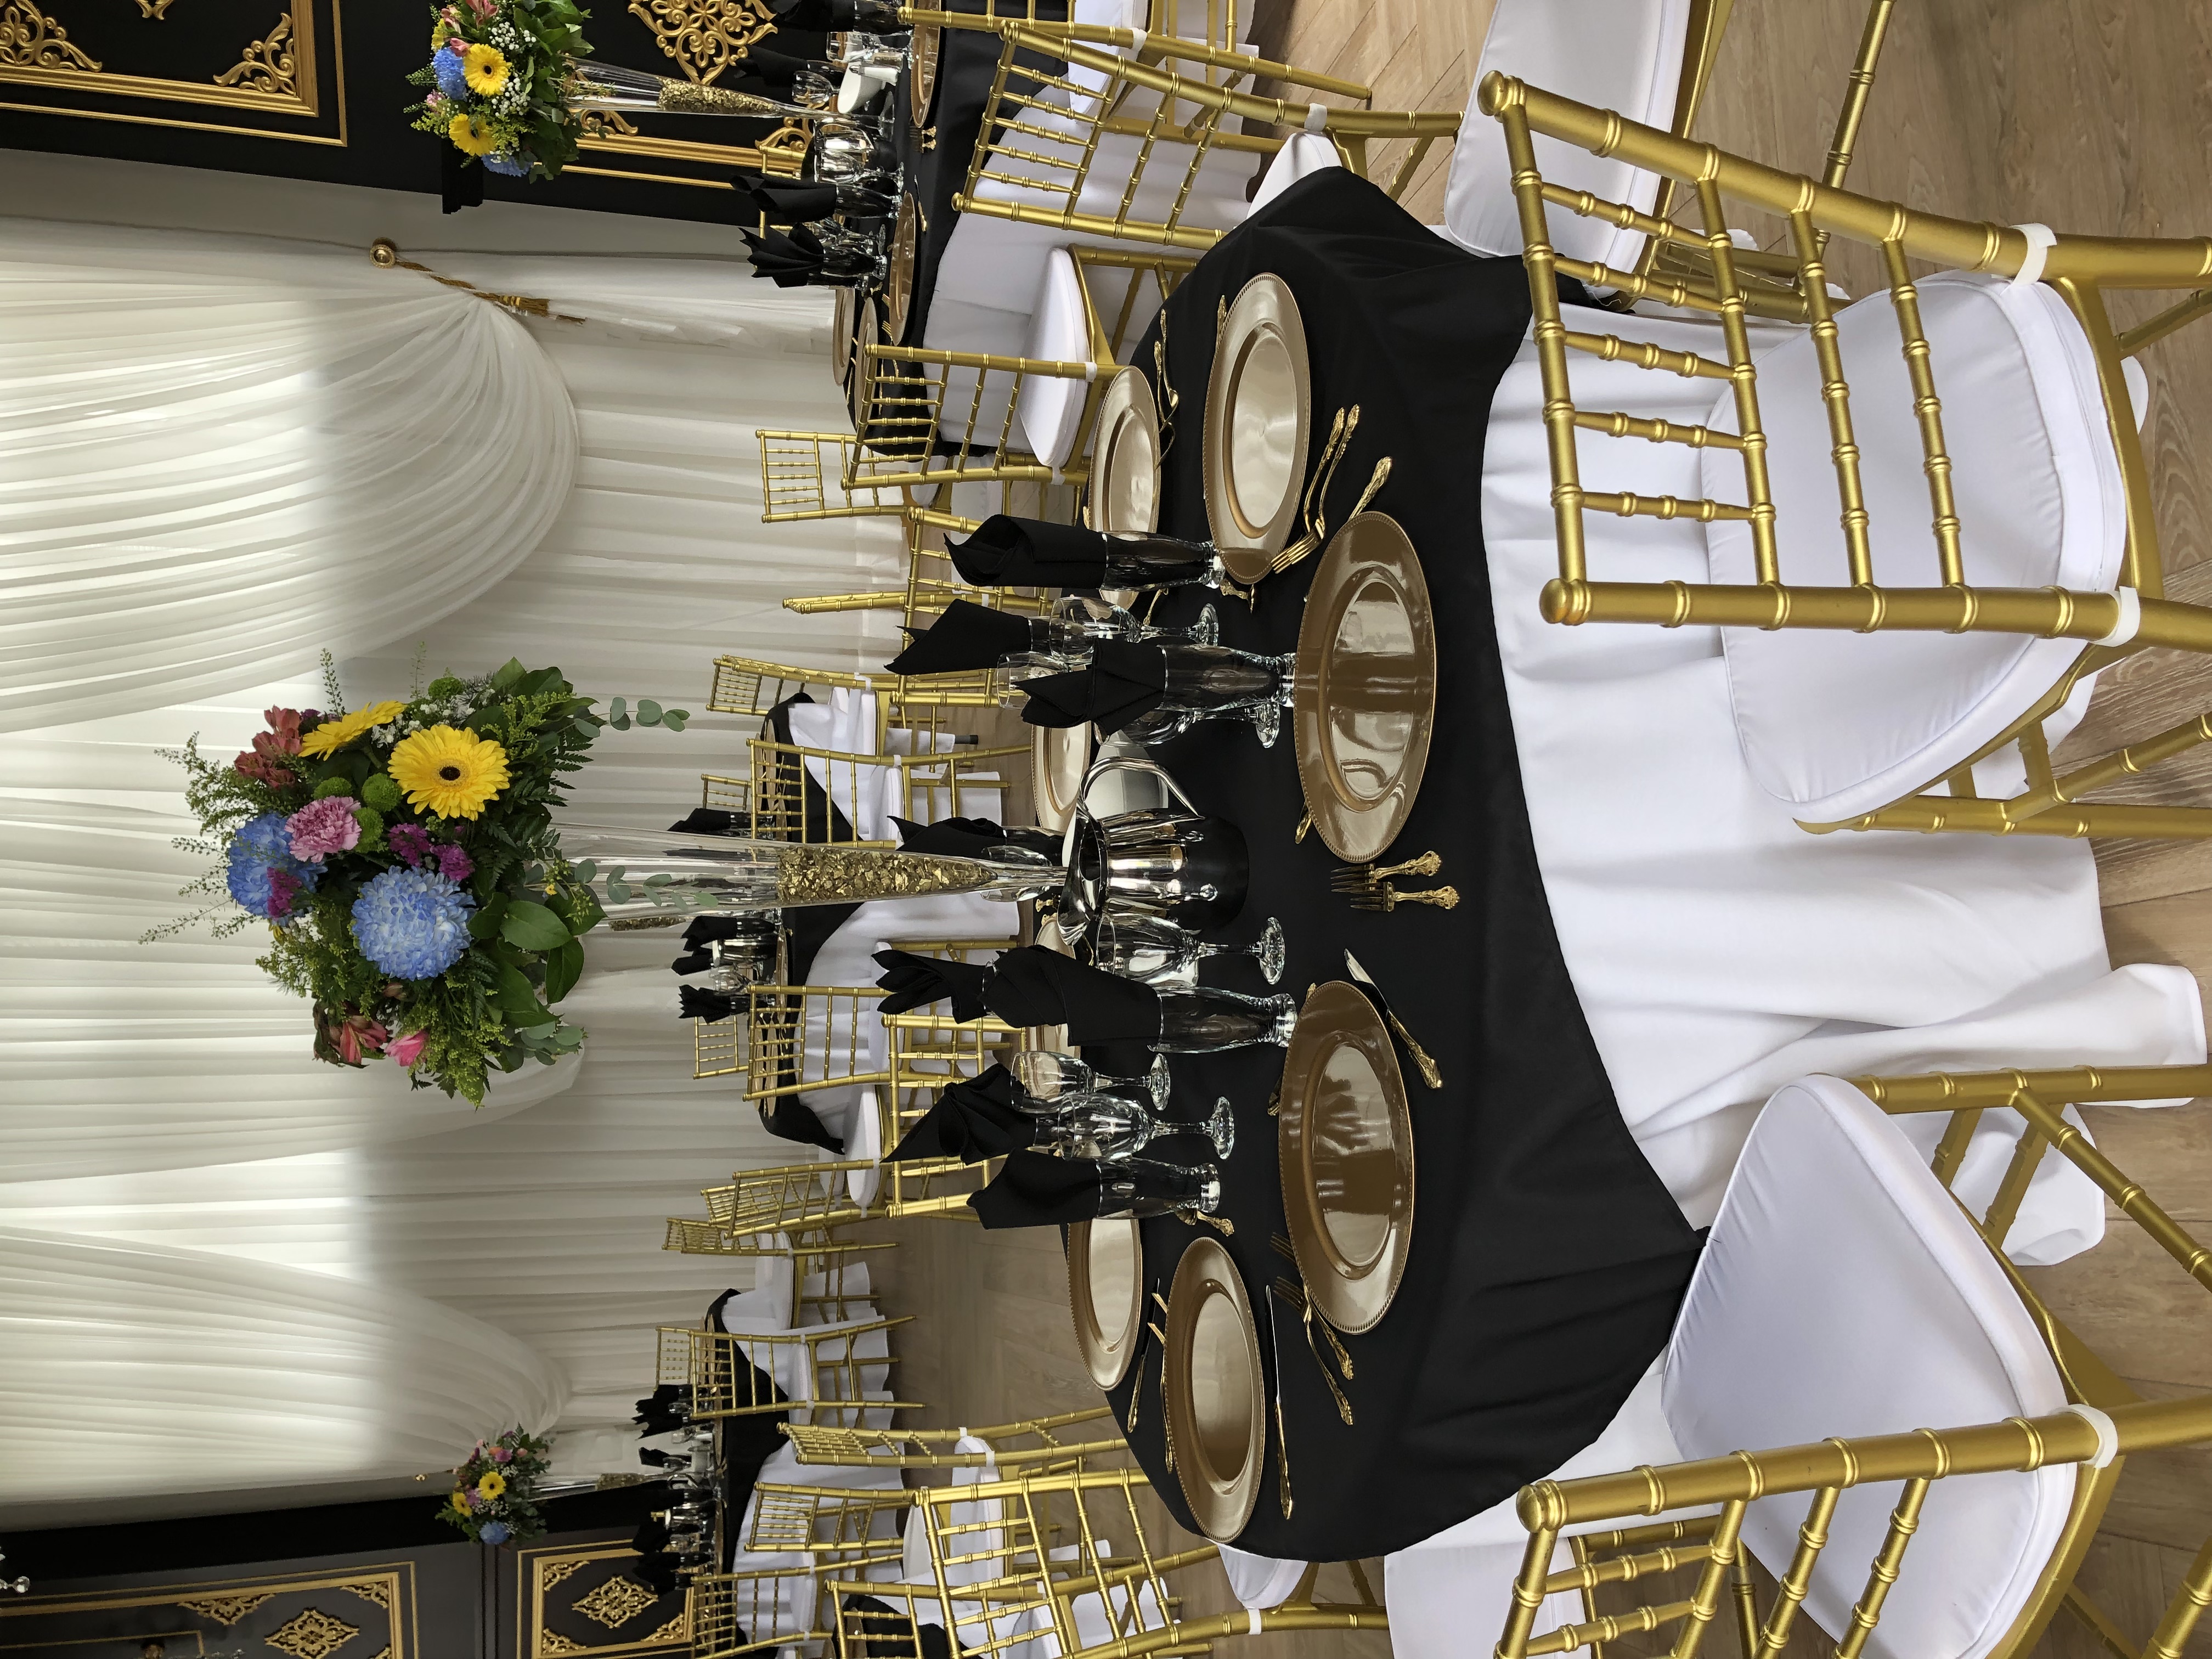 This image depicts chairs, linens, dishware and vases provided by All Celebrations.